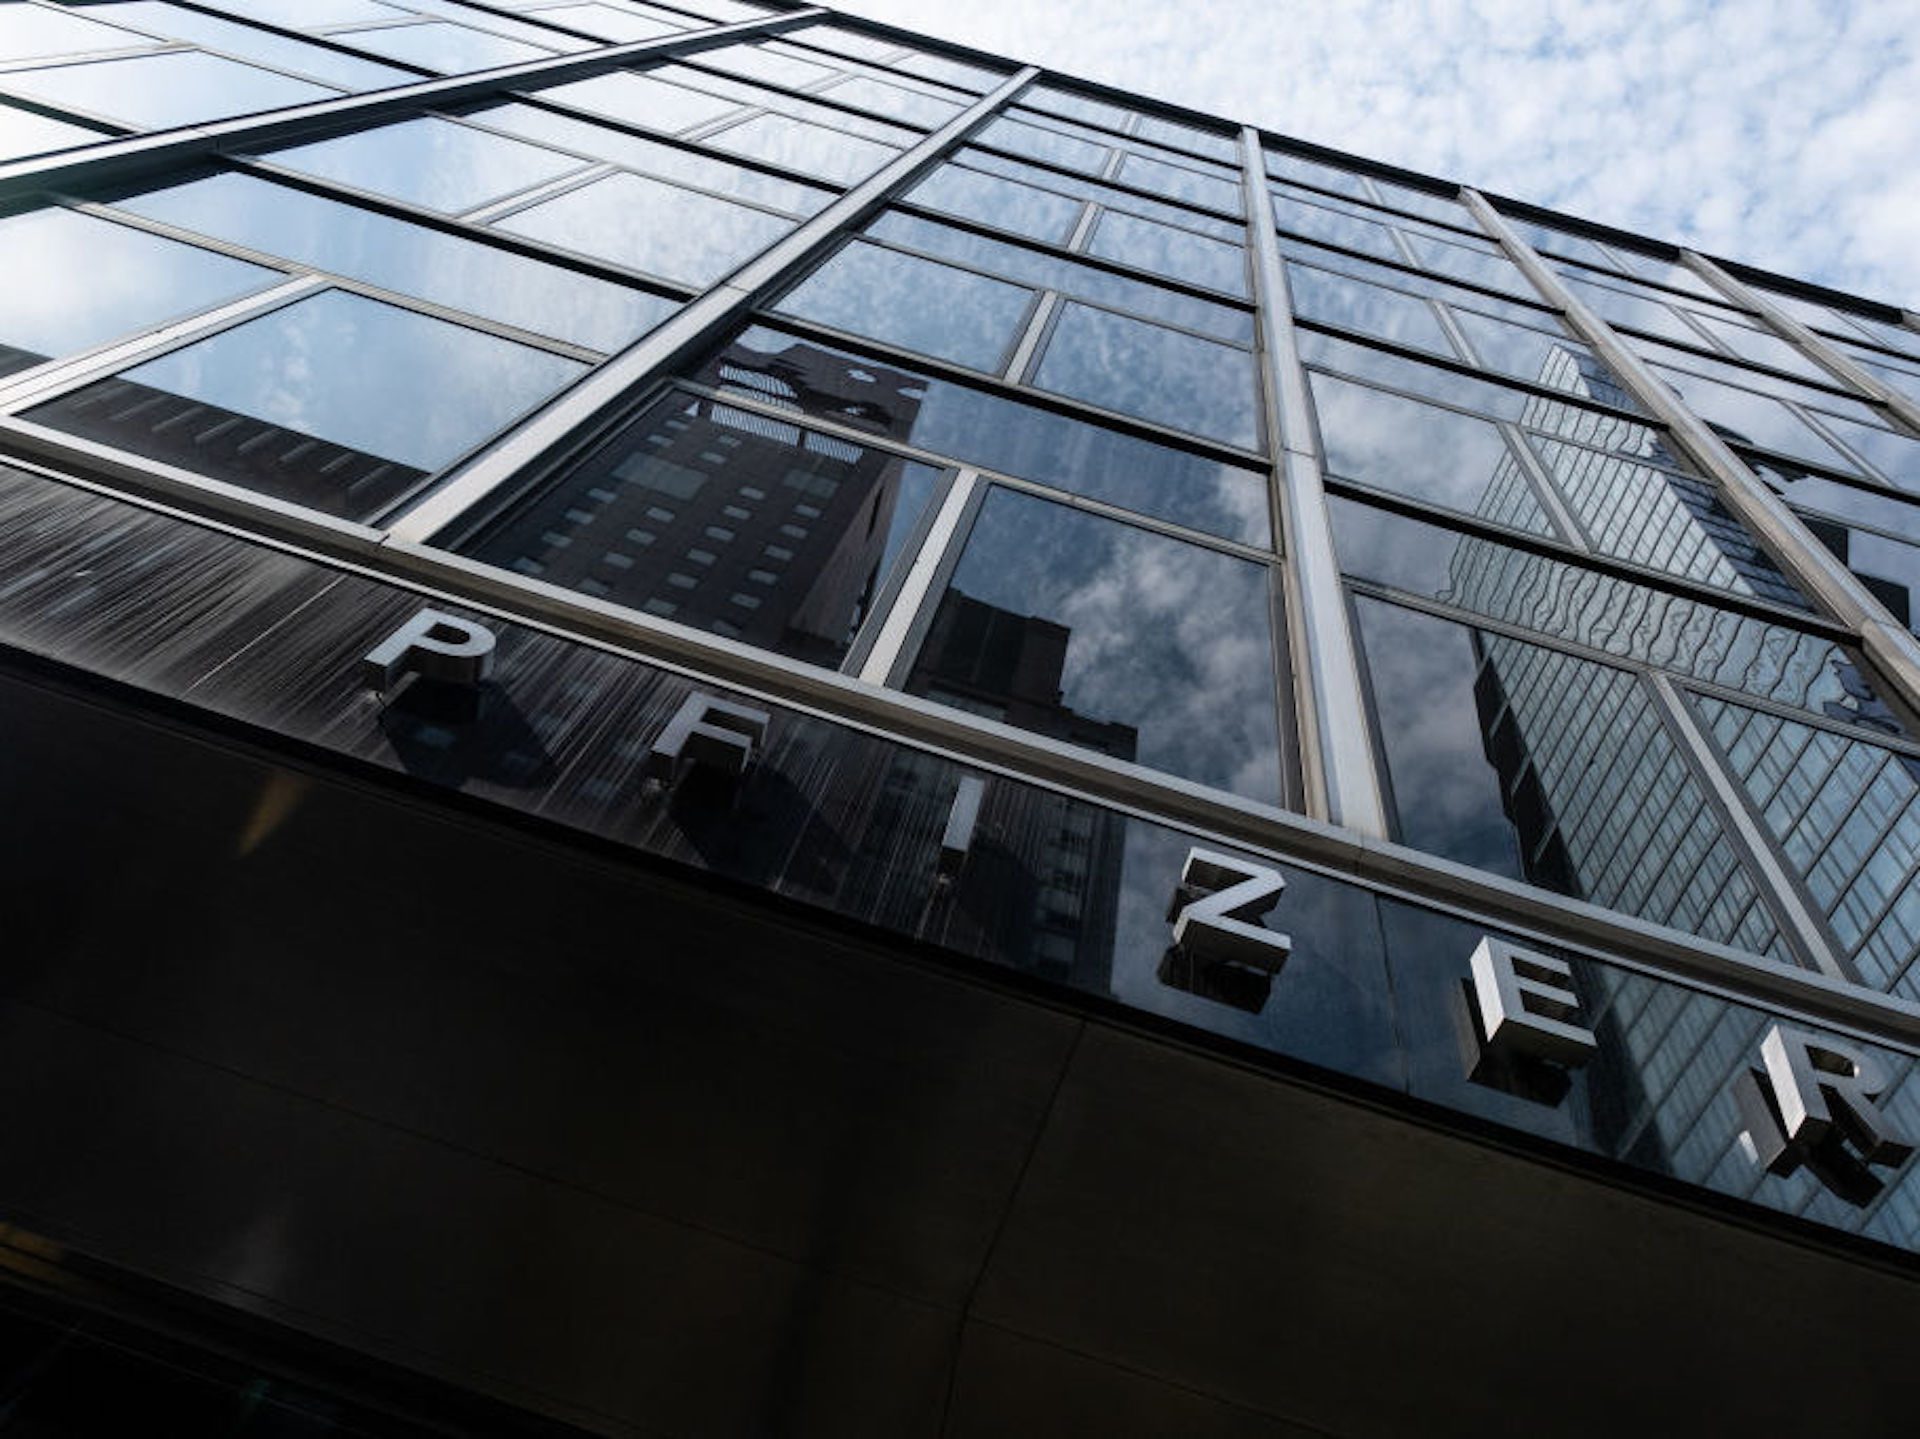 Pfizer Inc. headquarters stands in New York, U.S., on Wednesday, July 22, 2020. The agreement also would allow the federal government to acquire an additional 500 million doses of the Pfizer vaccine.